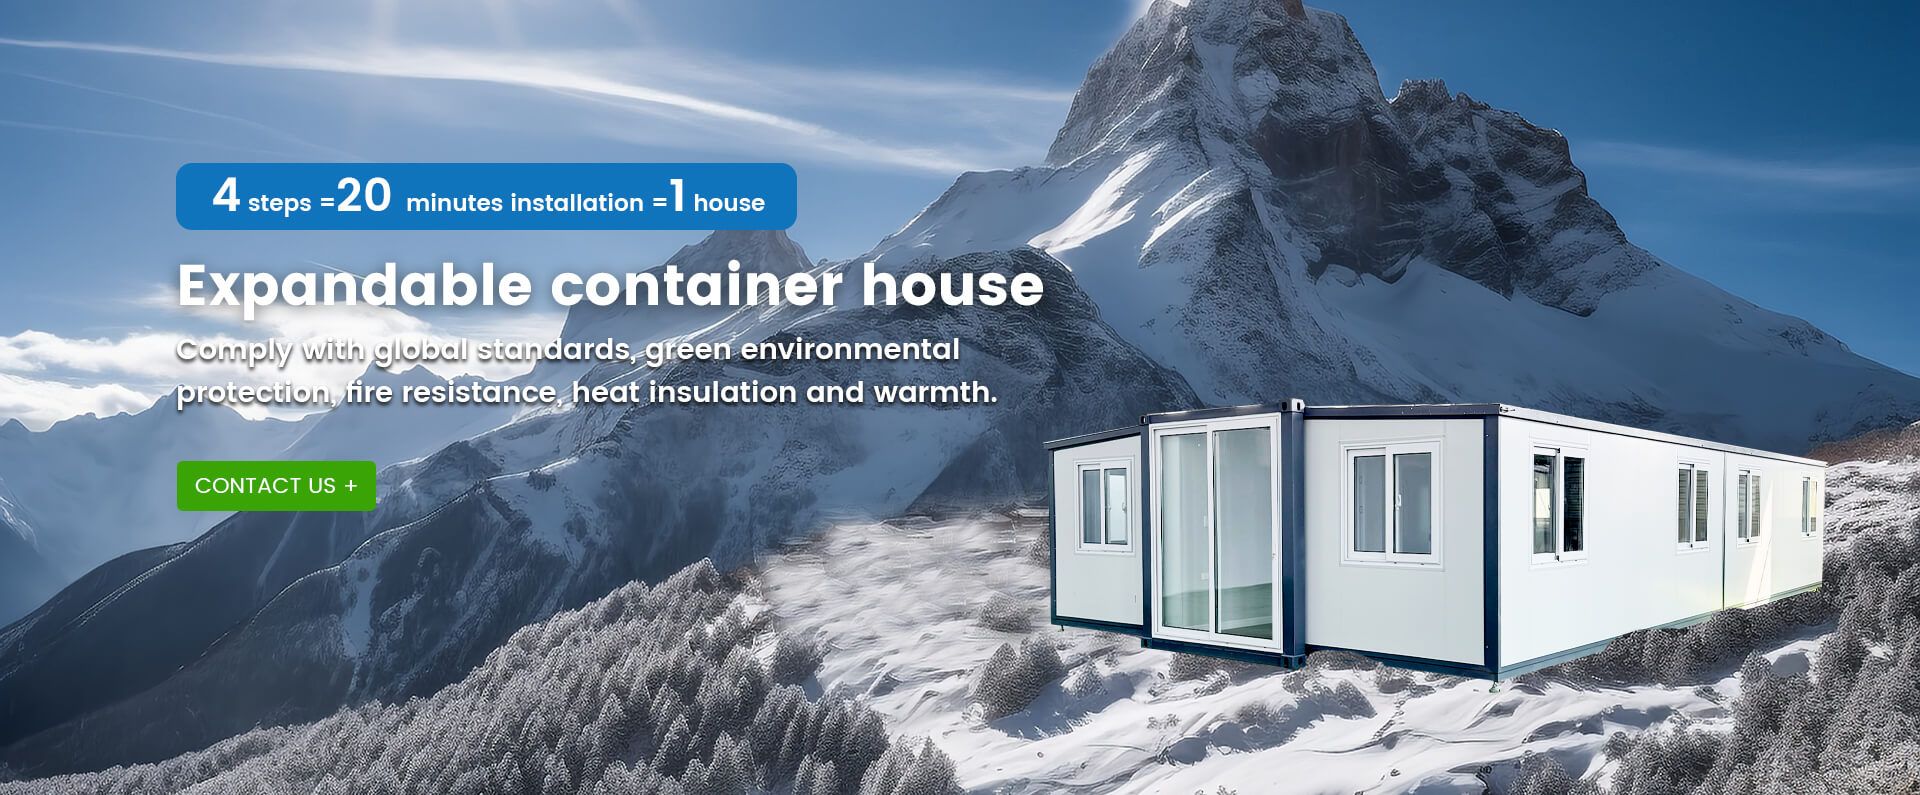 Expandable container house Comply with global standards, green environmental protection, fire resistance, heat insulation and warmth.